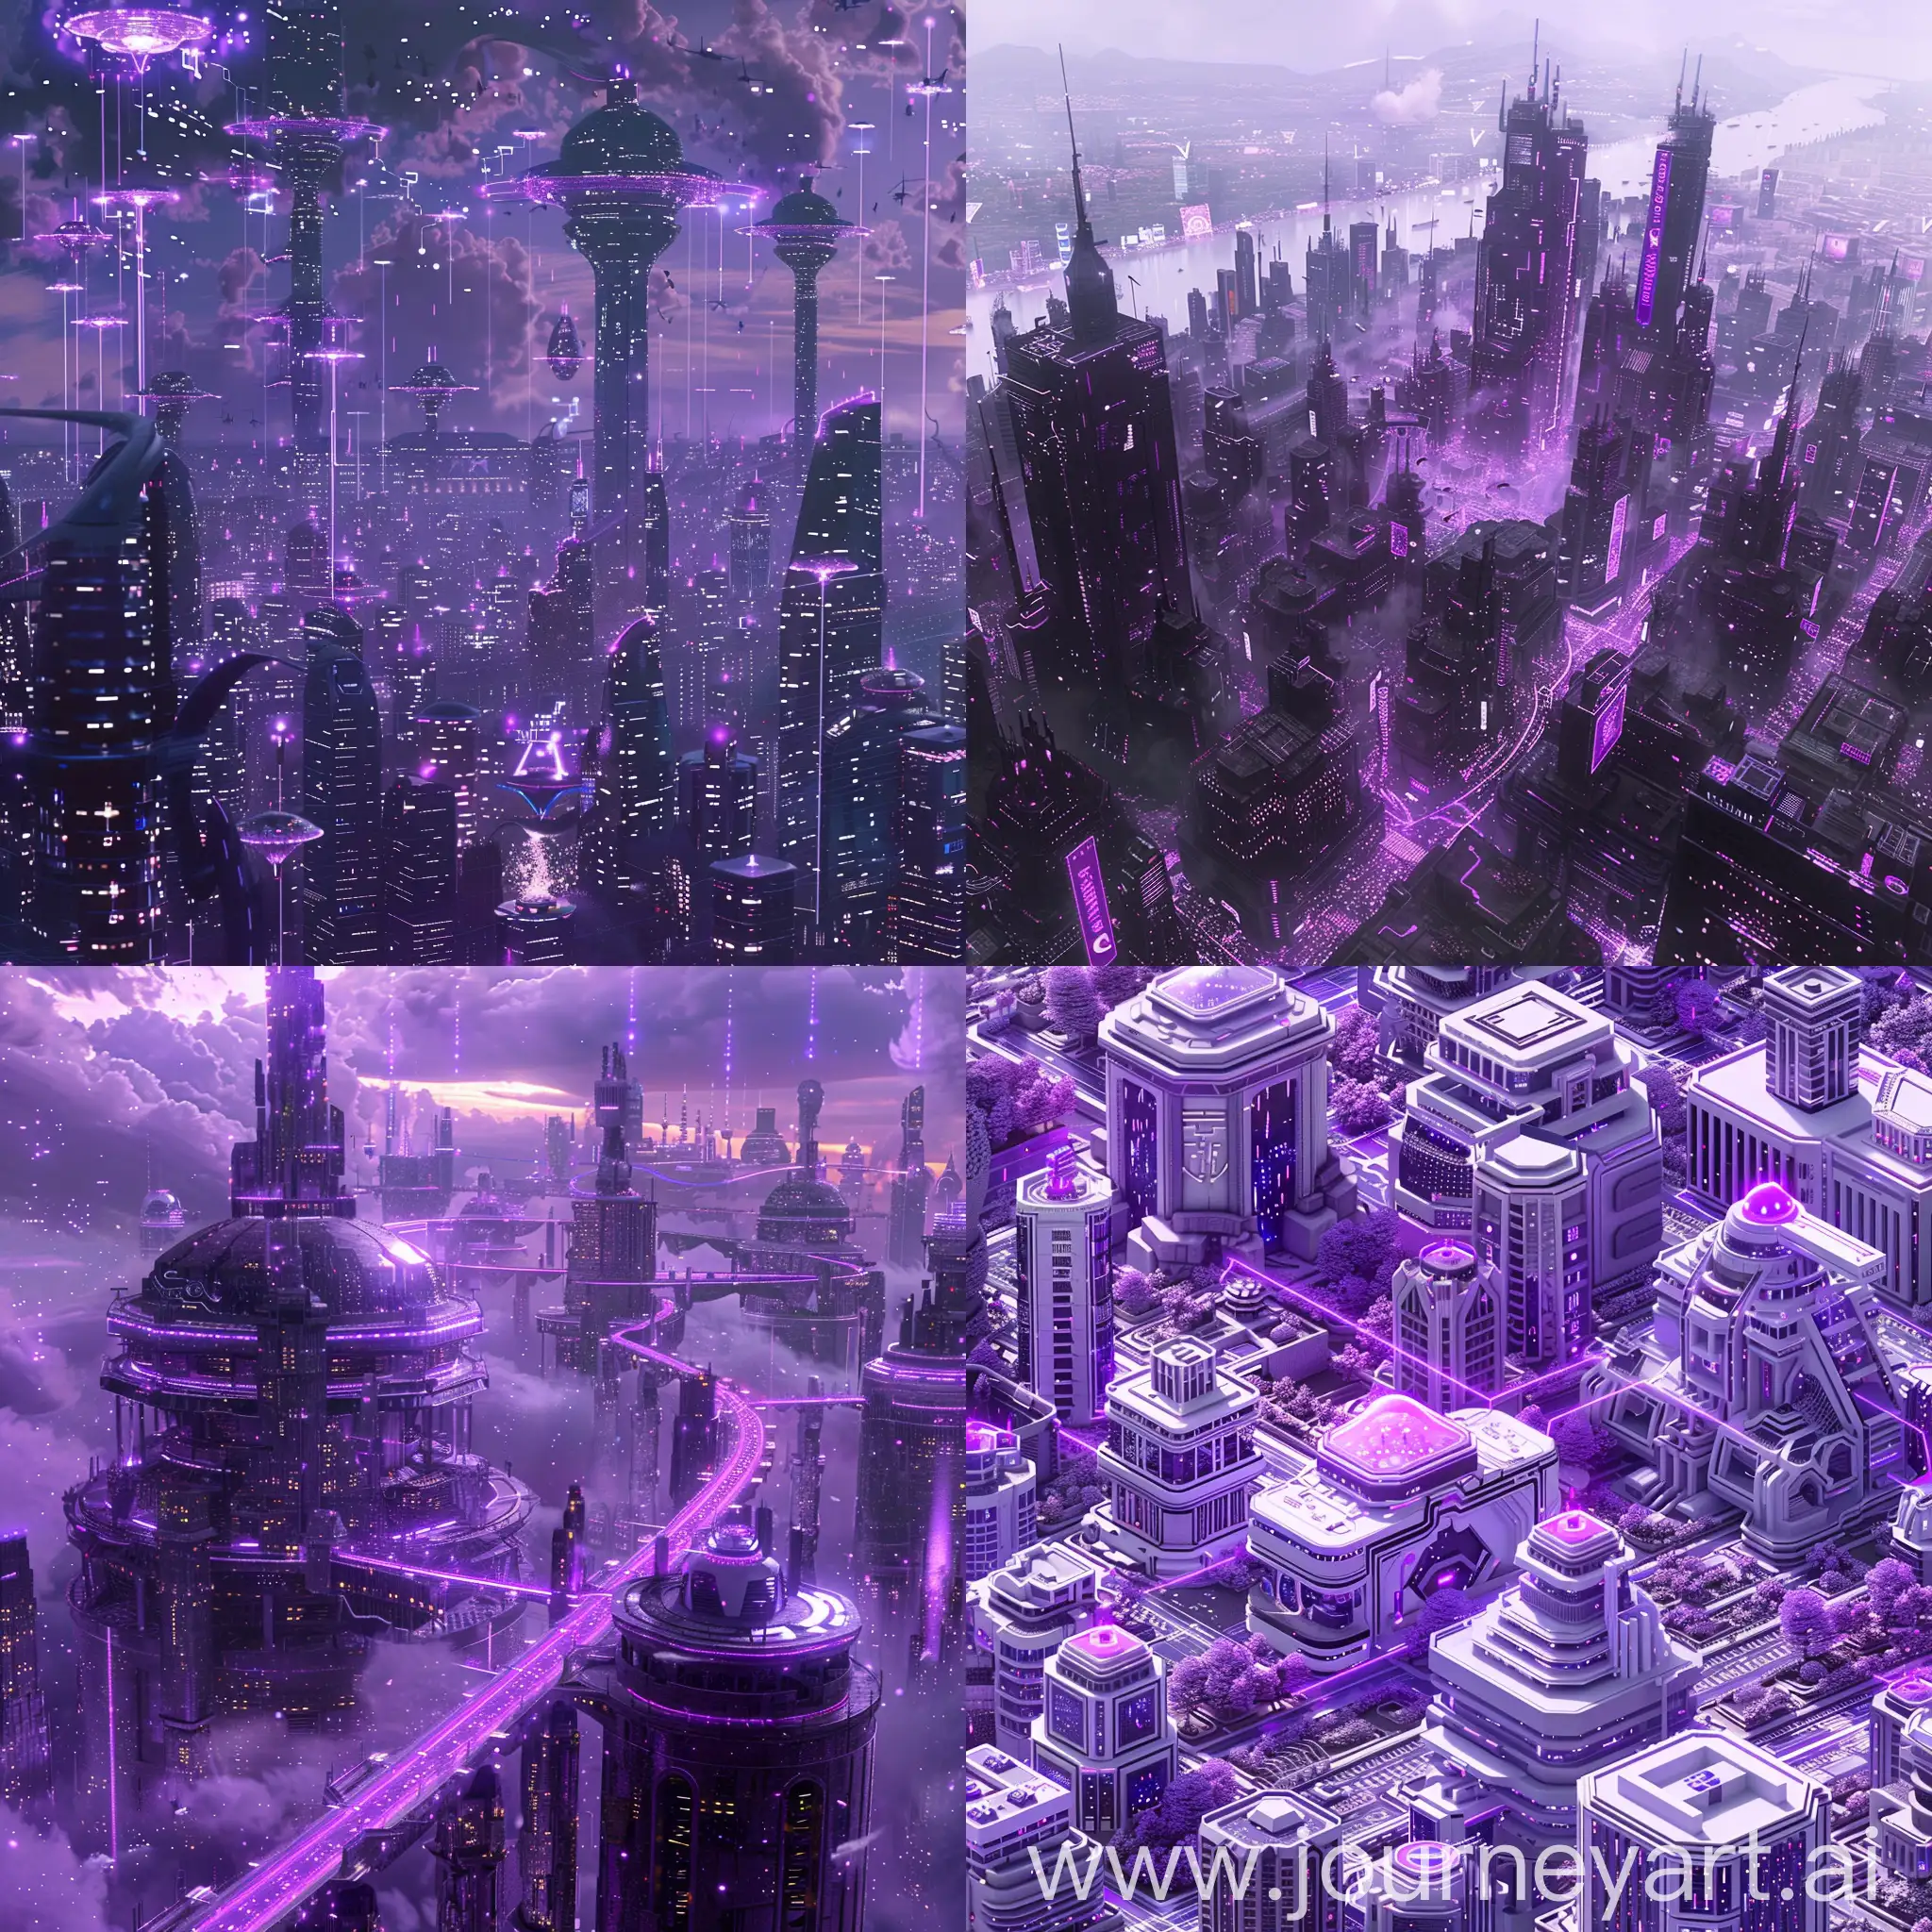 I want you to create a city that looks real where everyone is connected to the internet through a network and that the city has details in purple